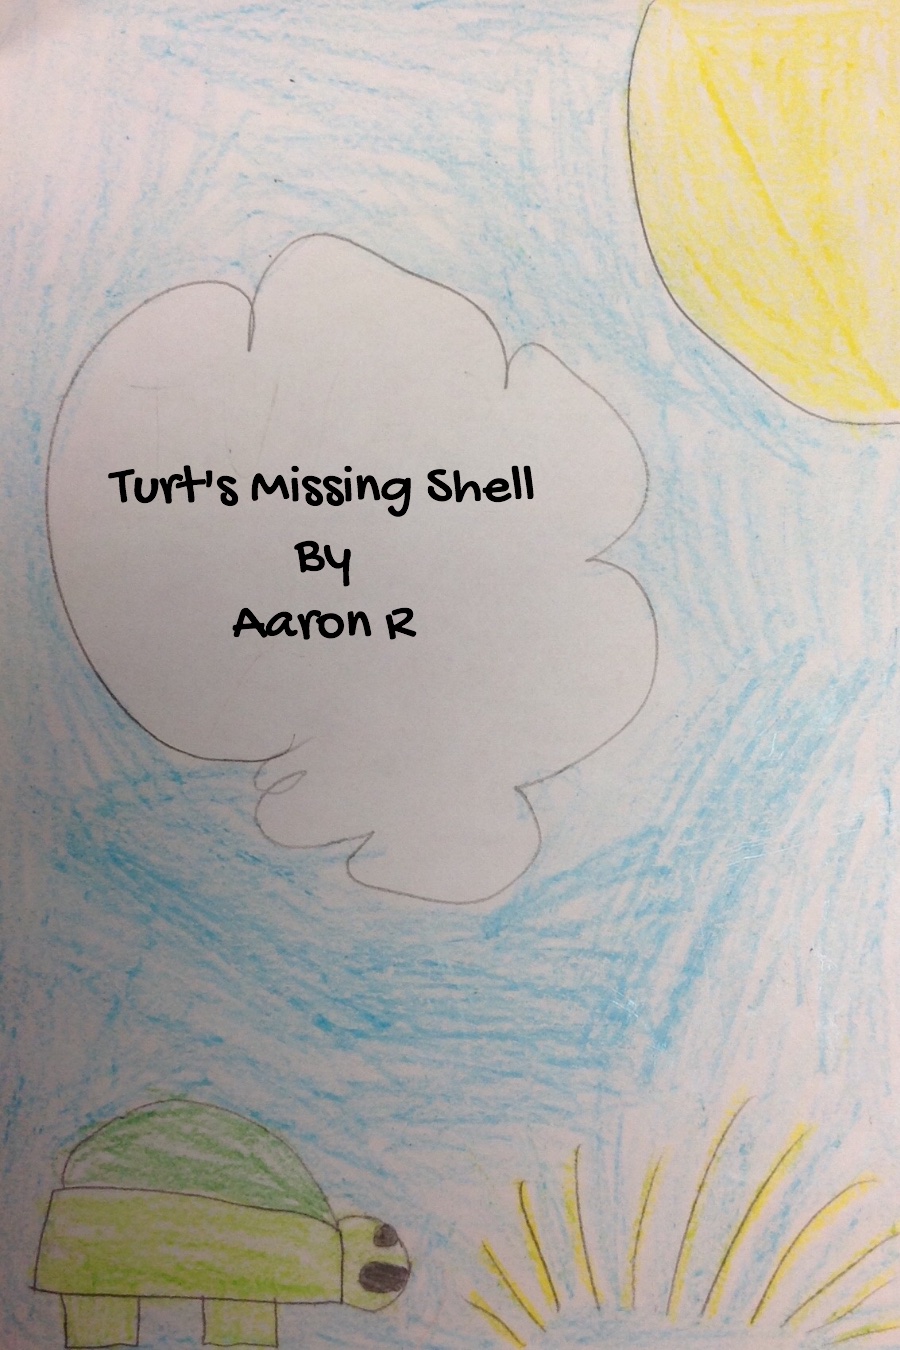 Turt’s Missing Shell by Aaron R